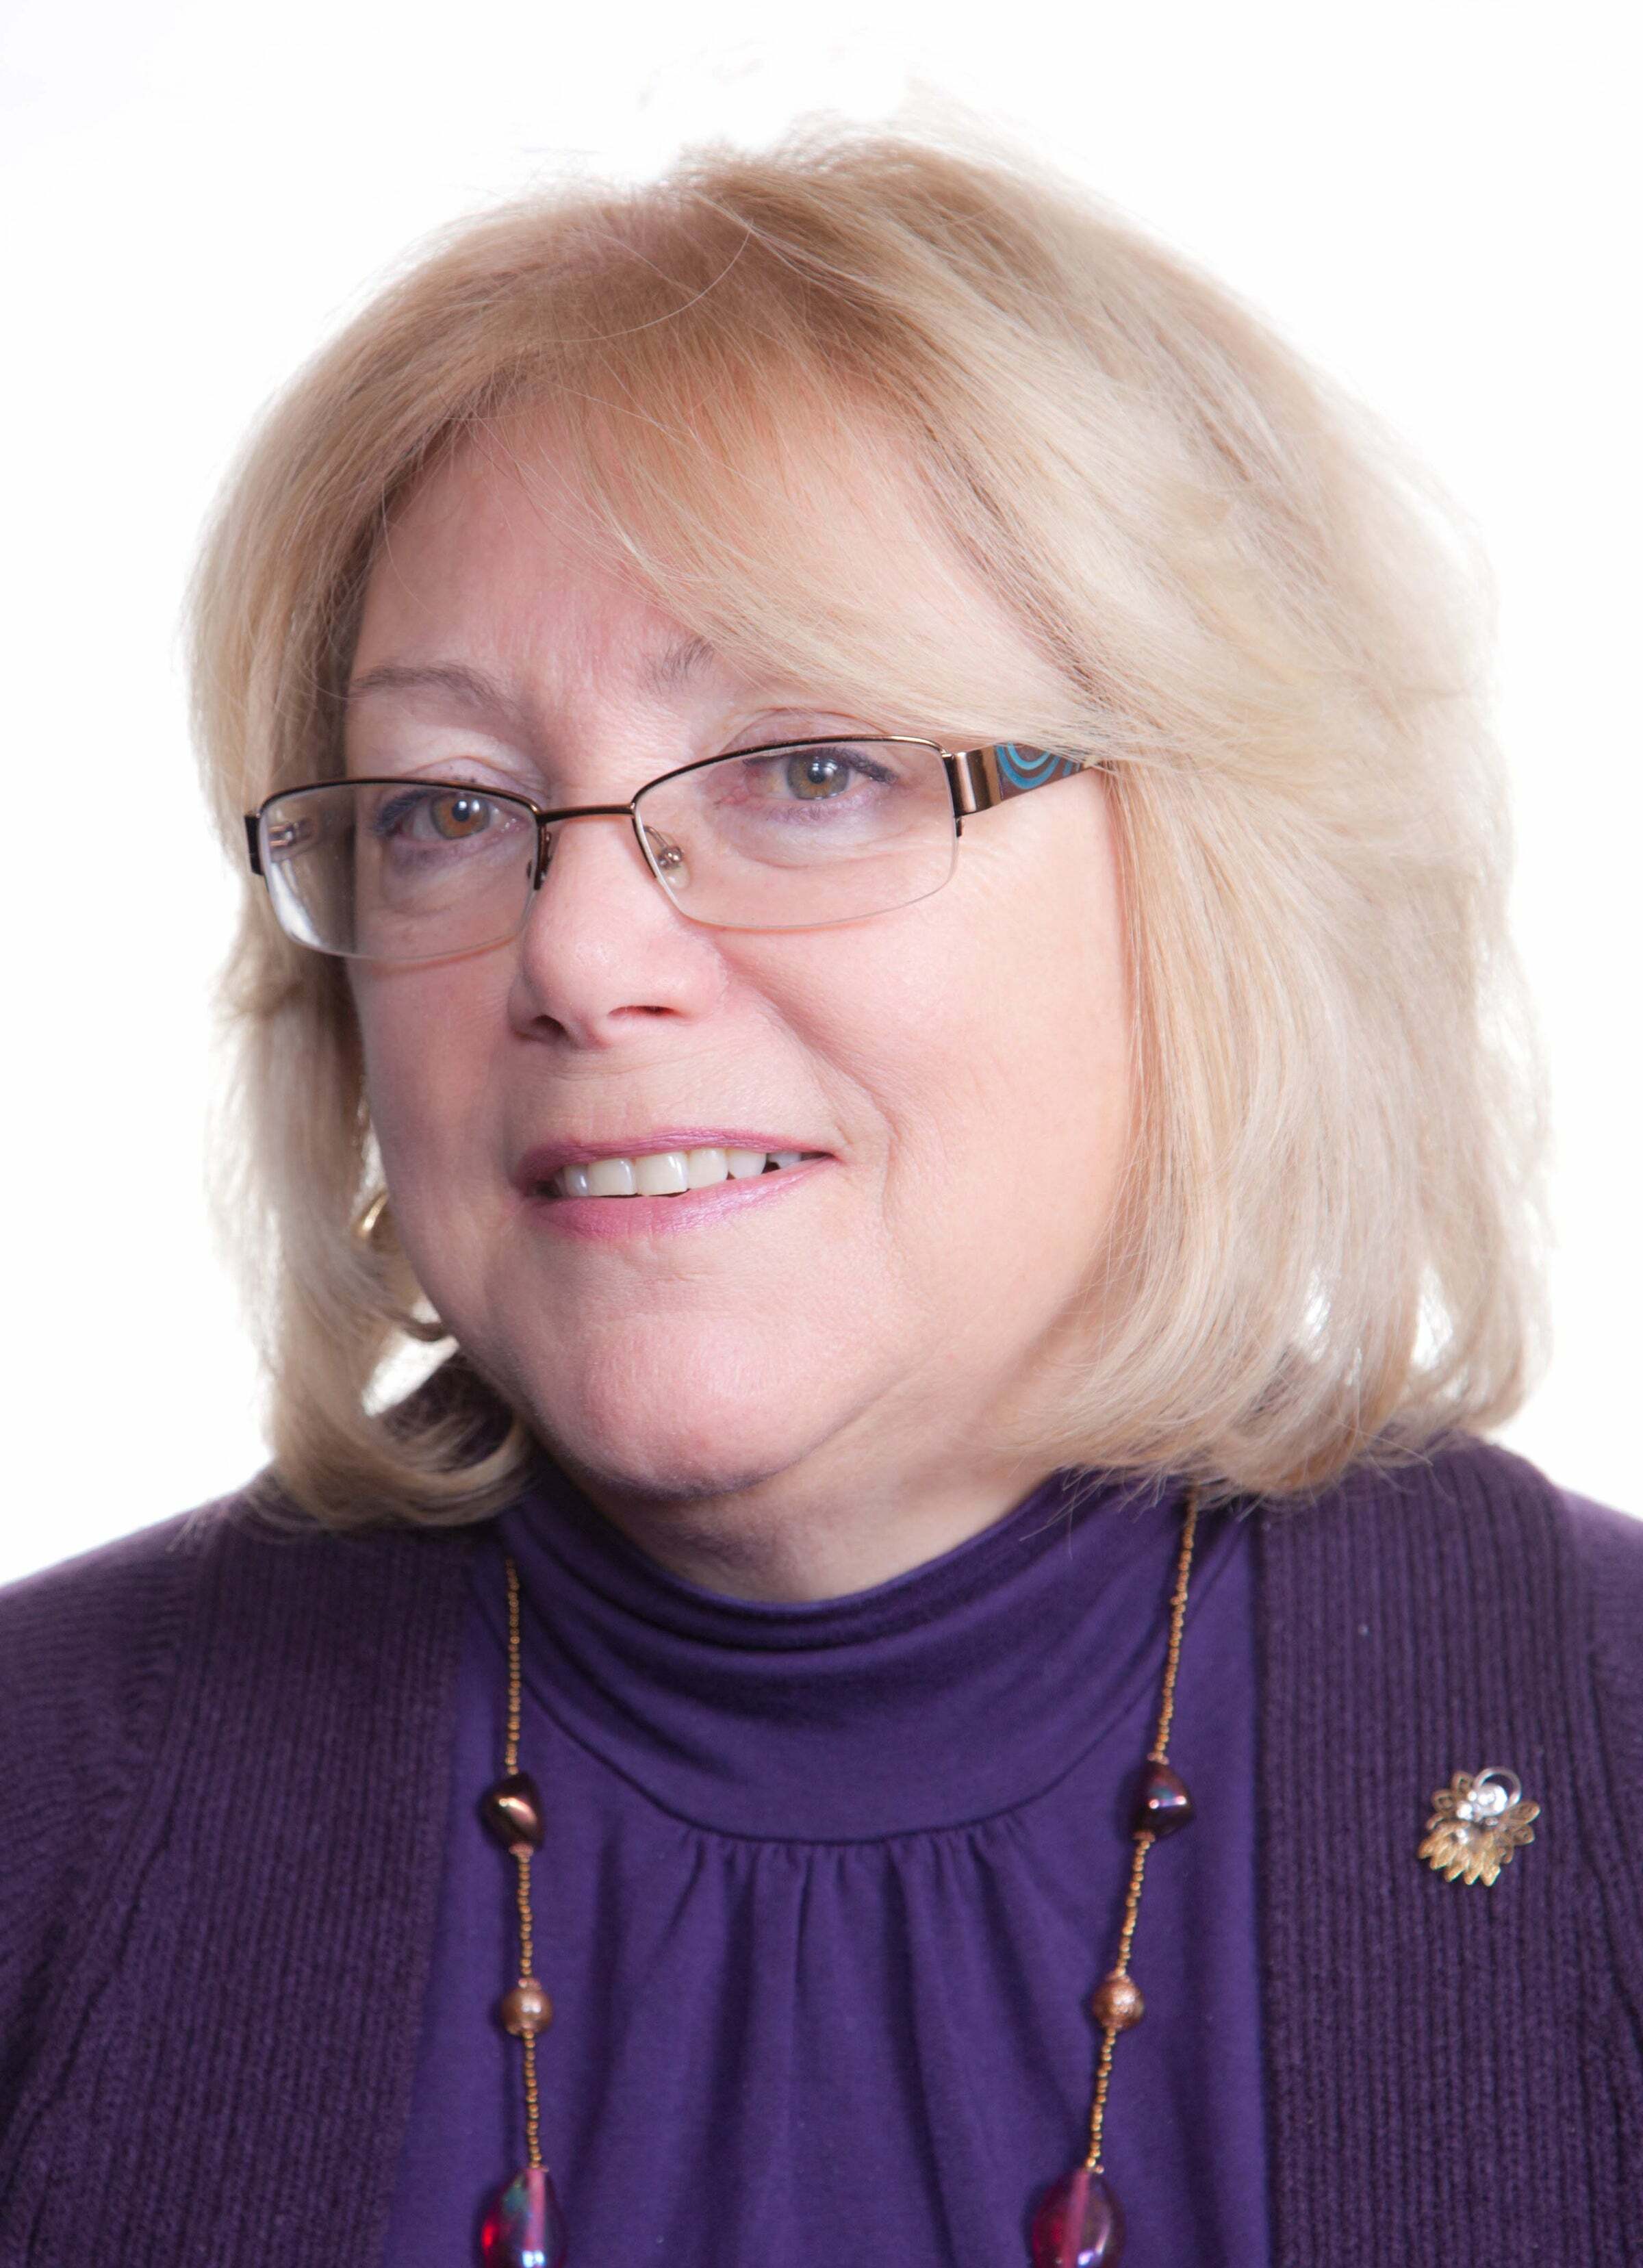 Jane Burrows, Associate Real Estate Broker in South Amboy, Charles Smith Agency, Inc.